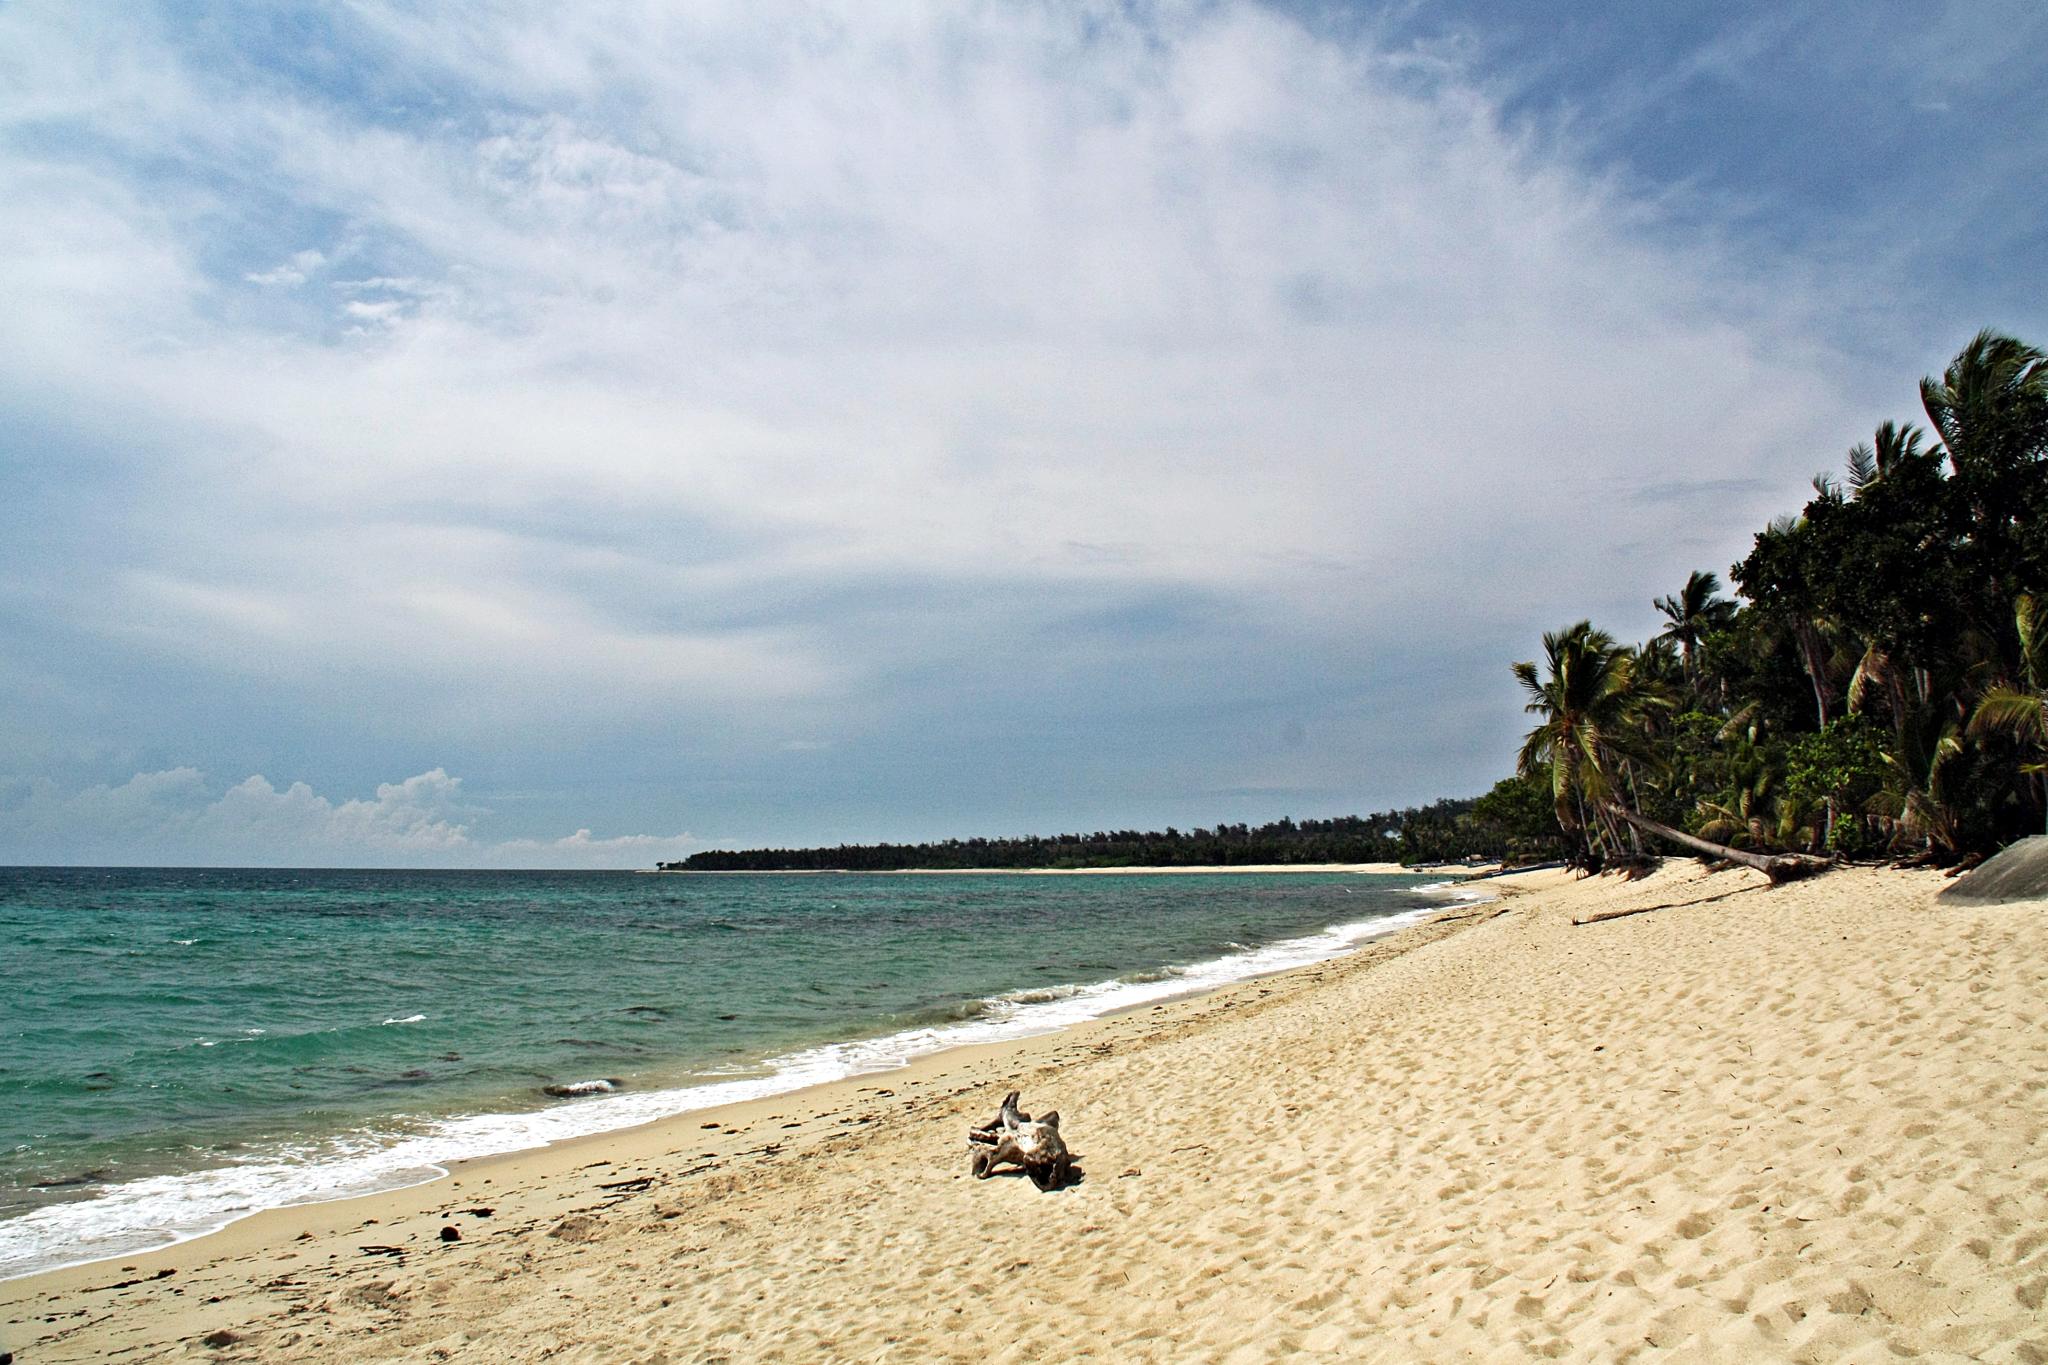 20 Best Islands with White Sand Beaches in the Philippines